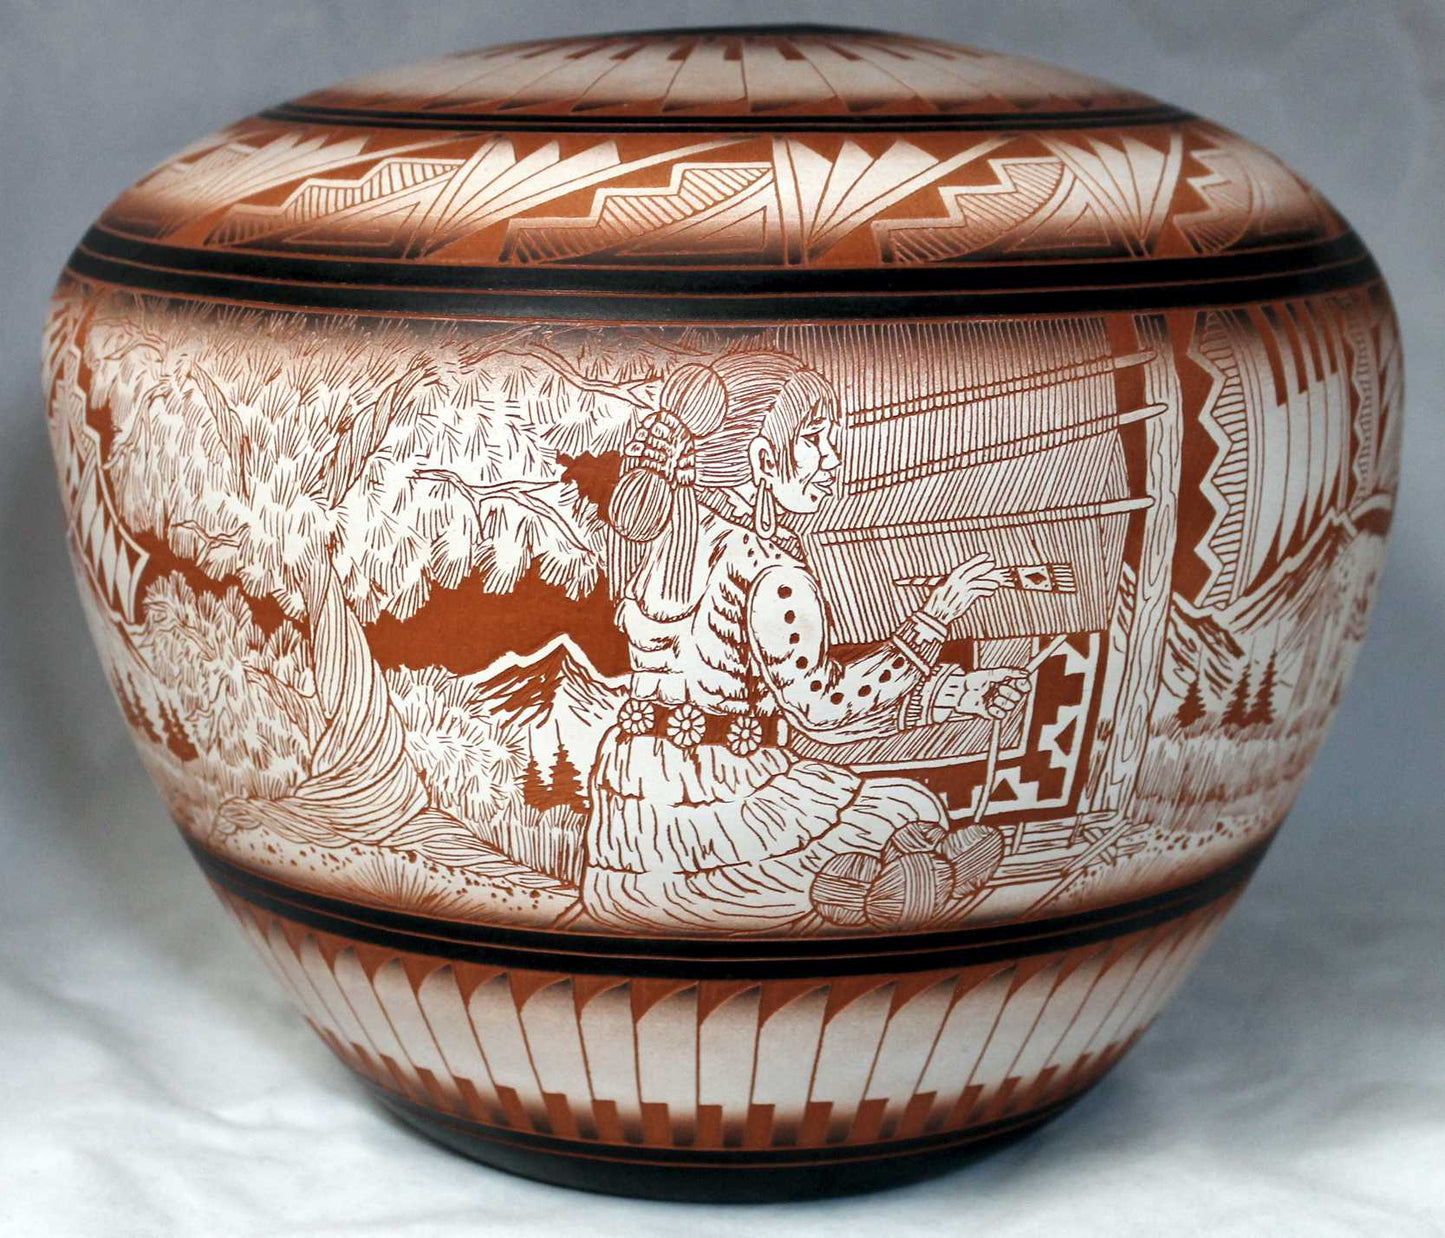 Authentic Navajo Etched Collector Piece by James Benally -(JBW250A)